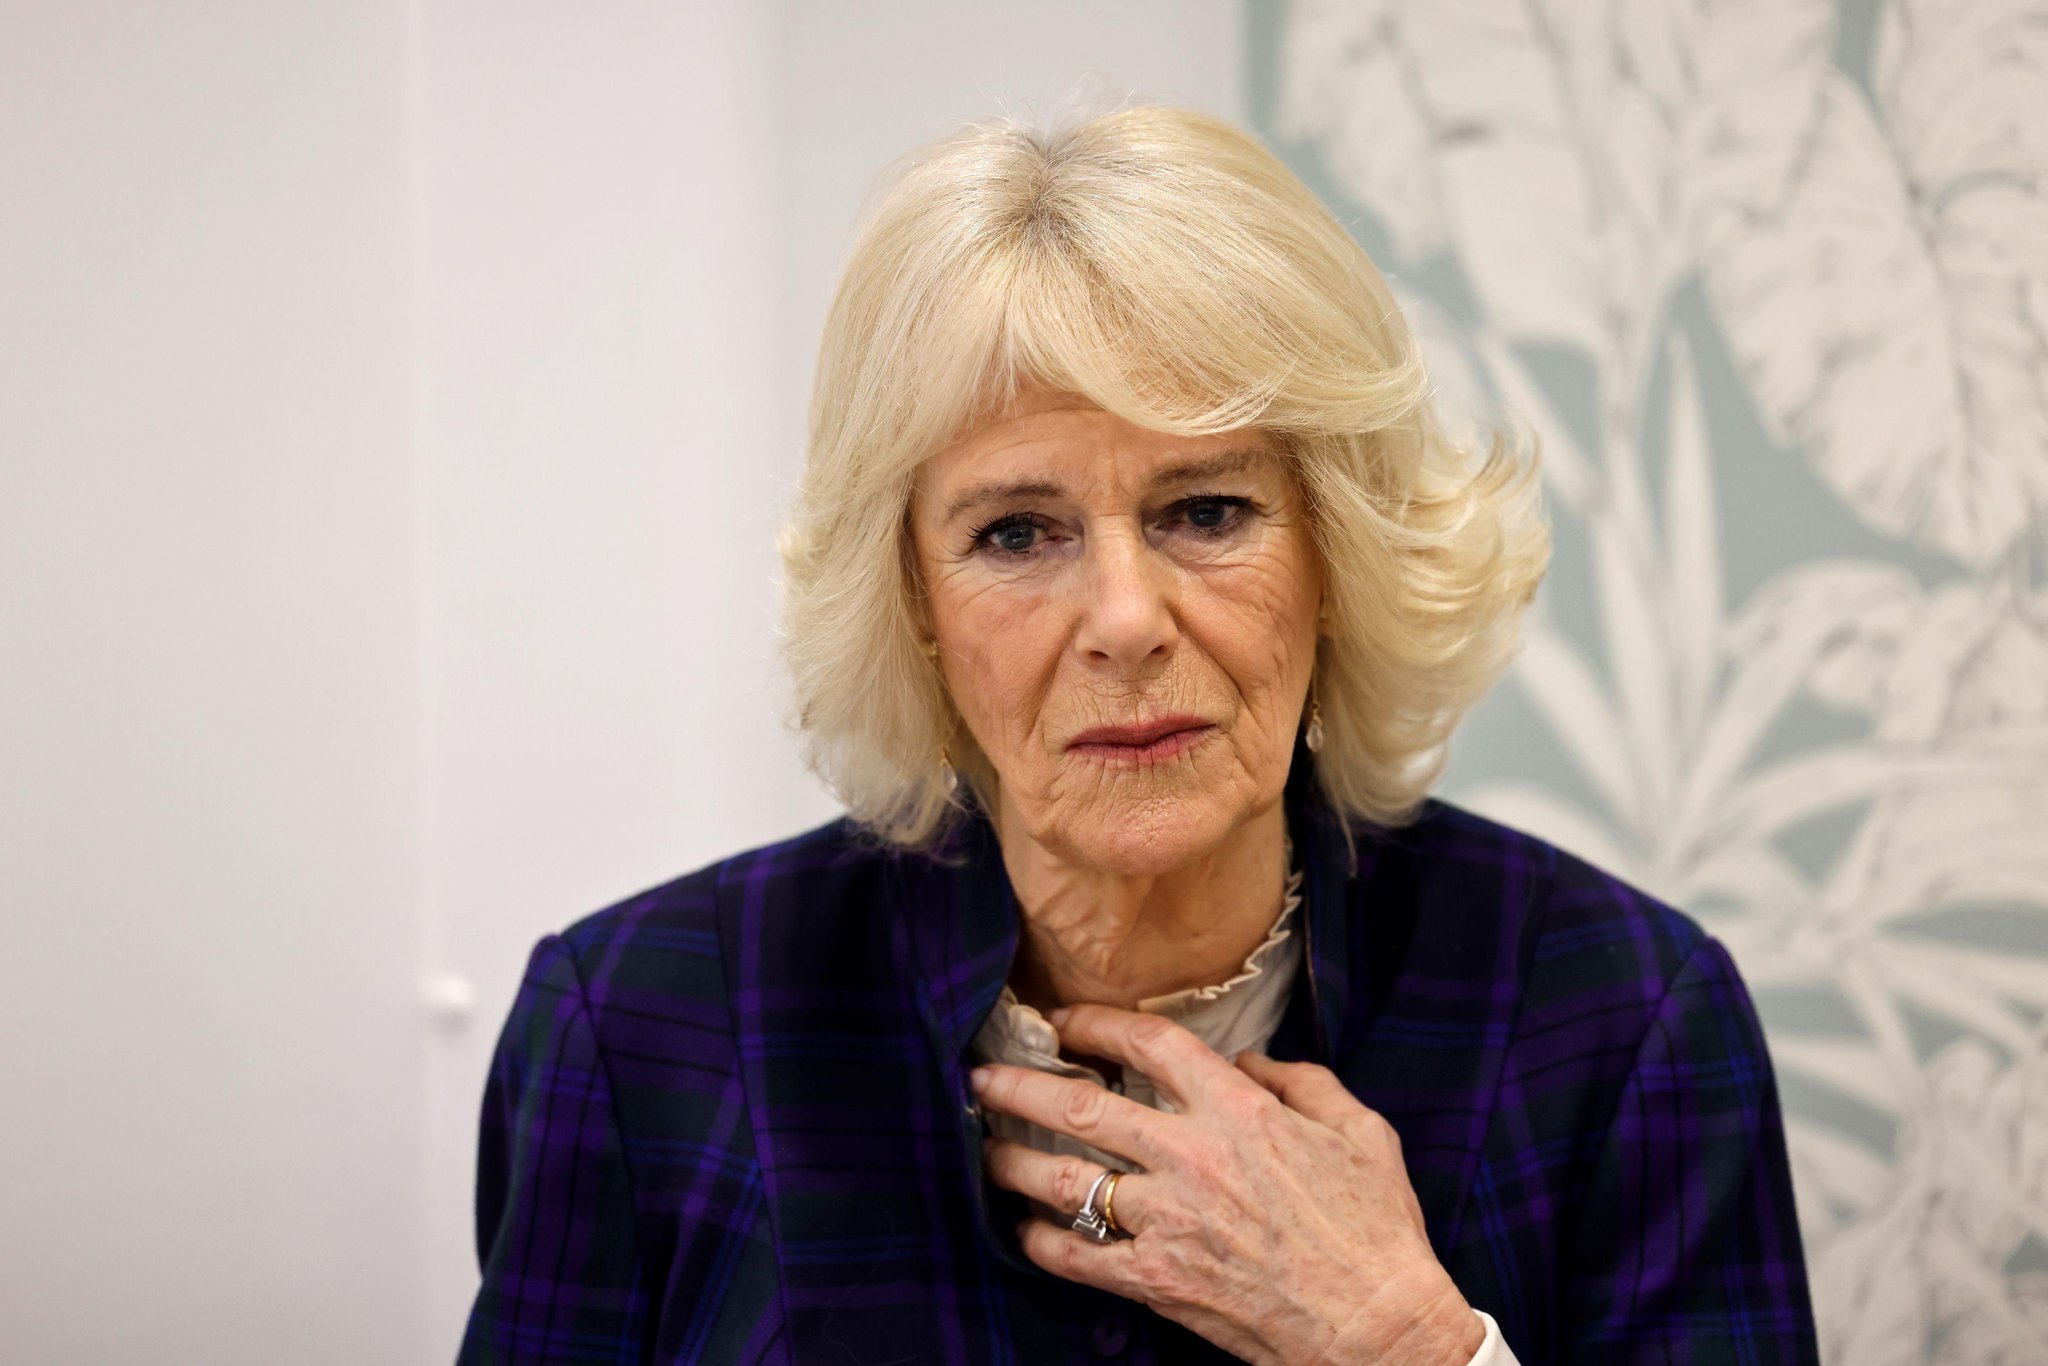 It'll be a great honour to be Queen: Camilla